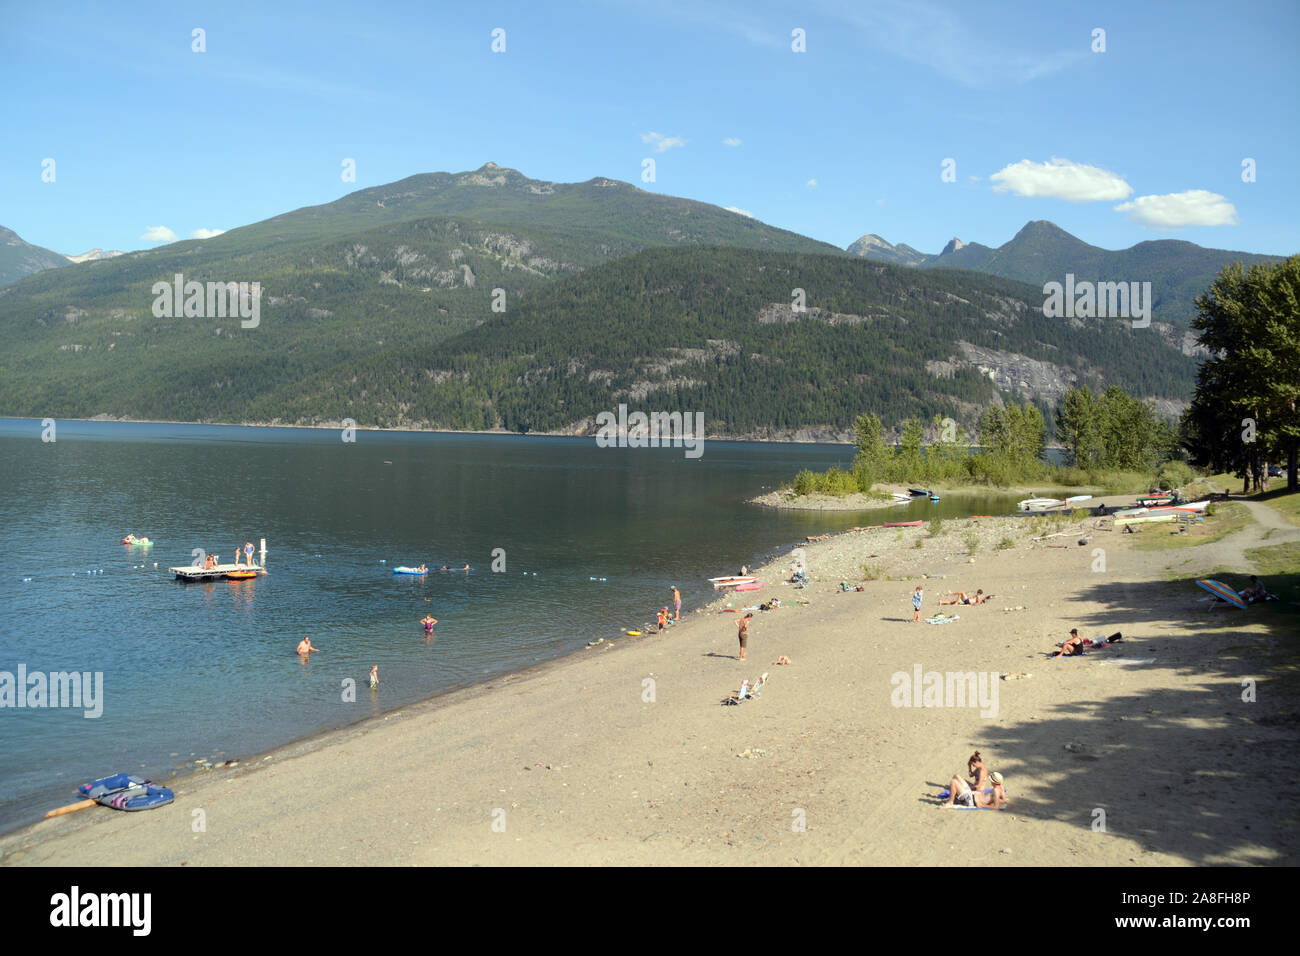 A view of the beach on Kootenay Lake in the alpine town of Kaslo, in Selkirk Mountains, in the Kootenay region of British Columbia, Canada. Stock Photo